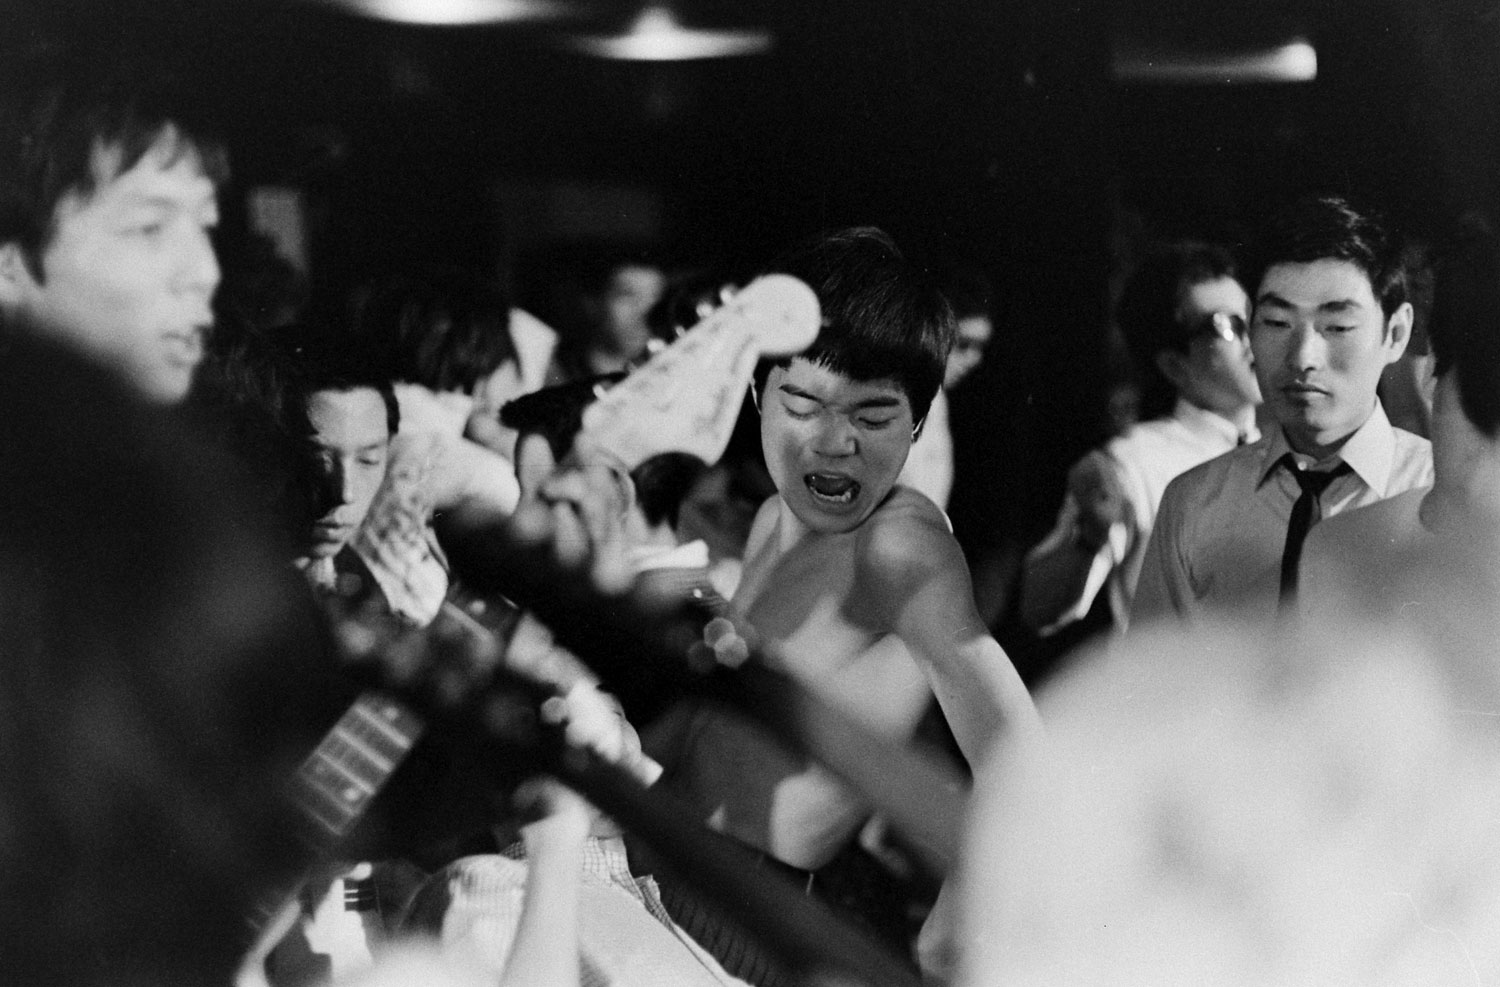 Rocking out with the "Tokyo Beatles," 1964.